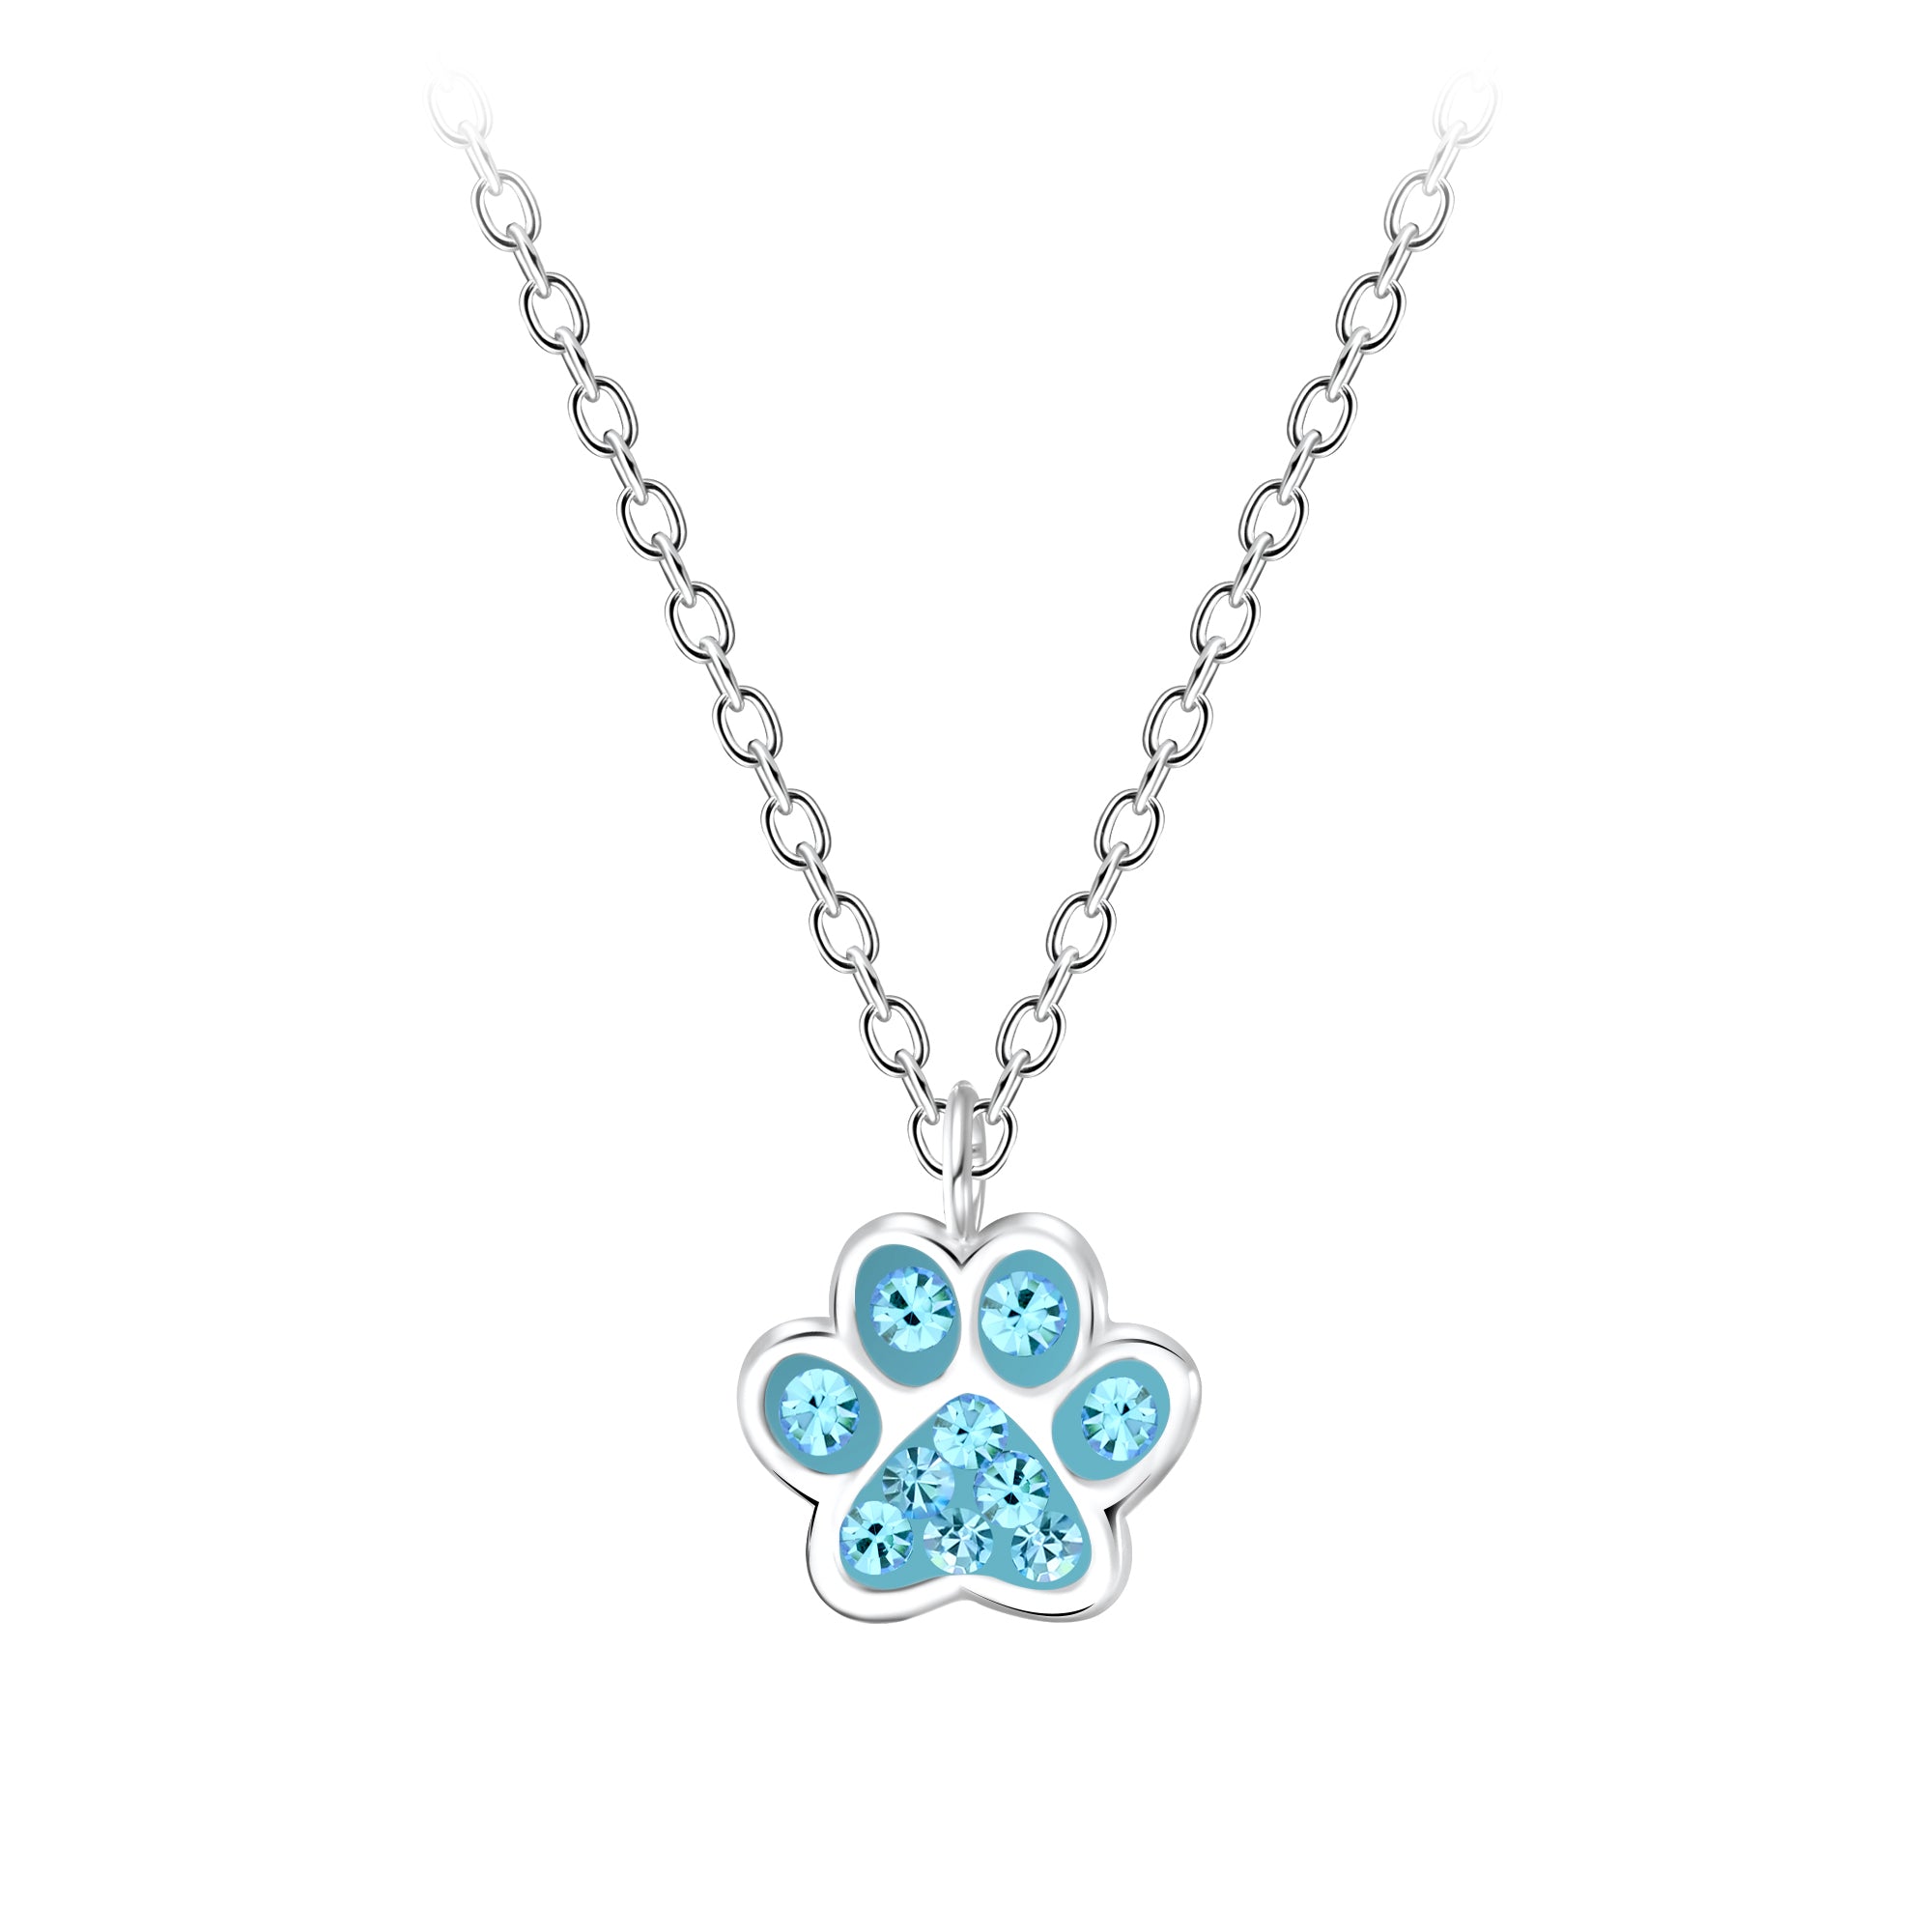 Buy Sterling Silver Silhouette Dog Paw Necklace Online in India - Etsy